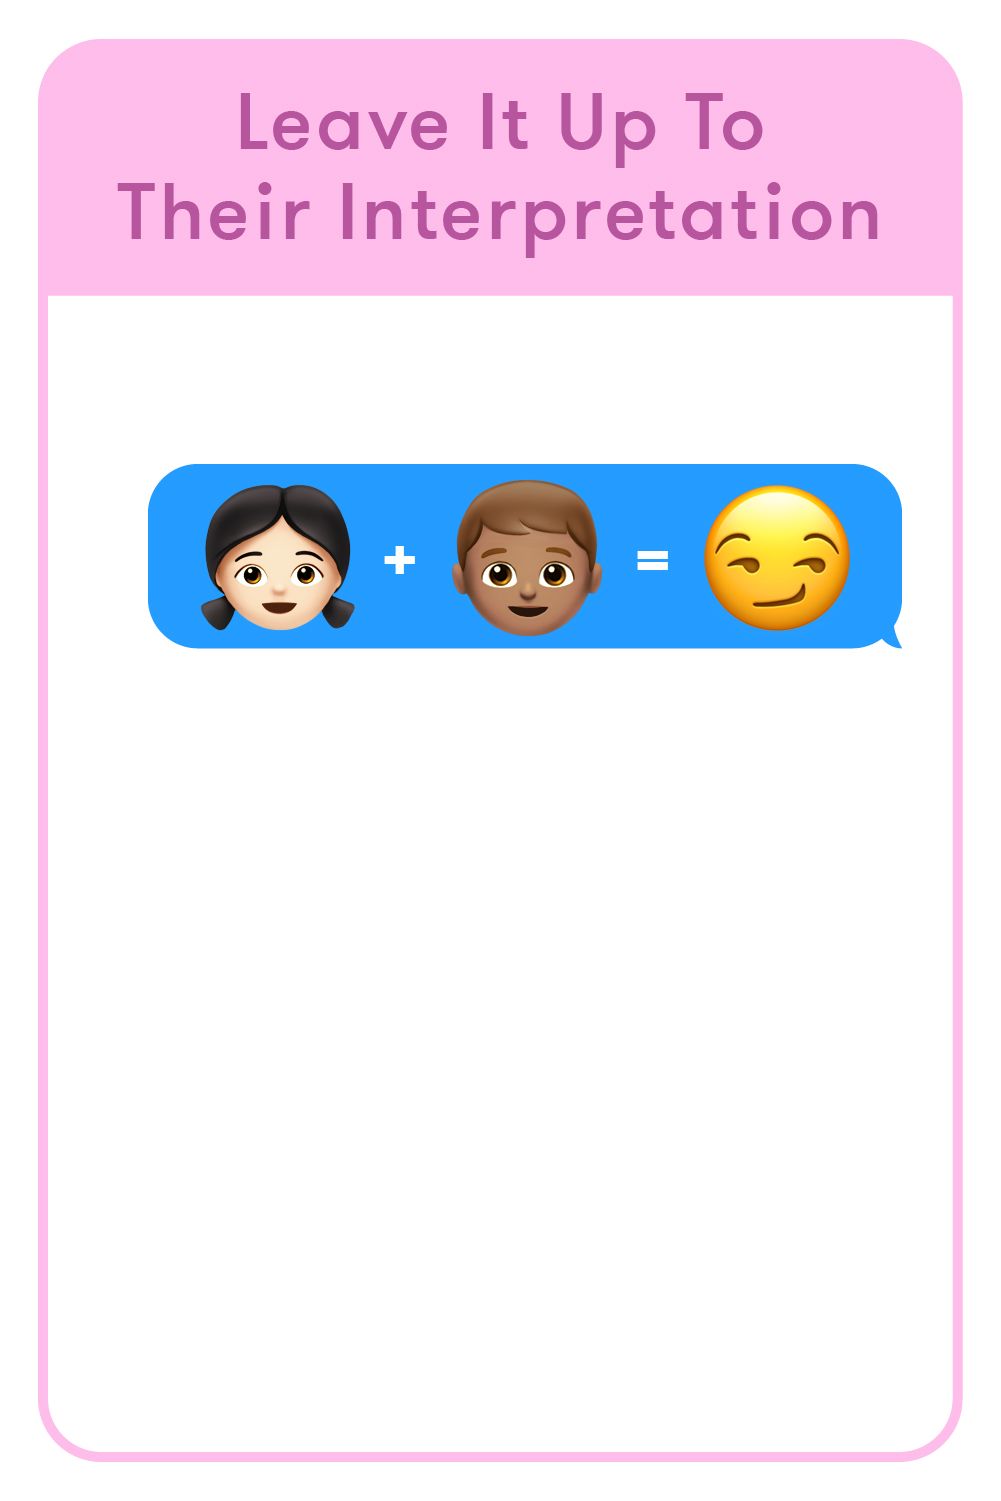 When to use emoticons in case of flirting?